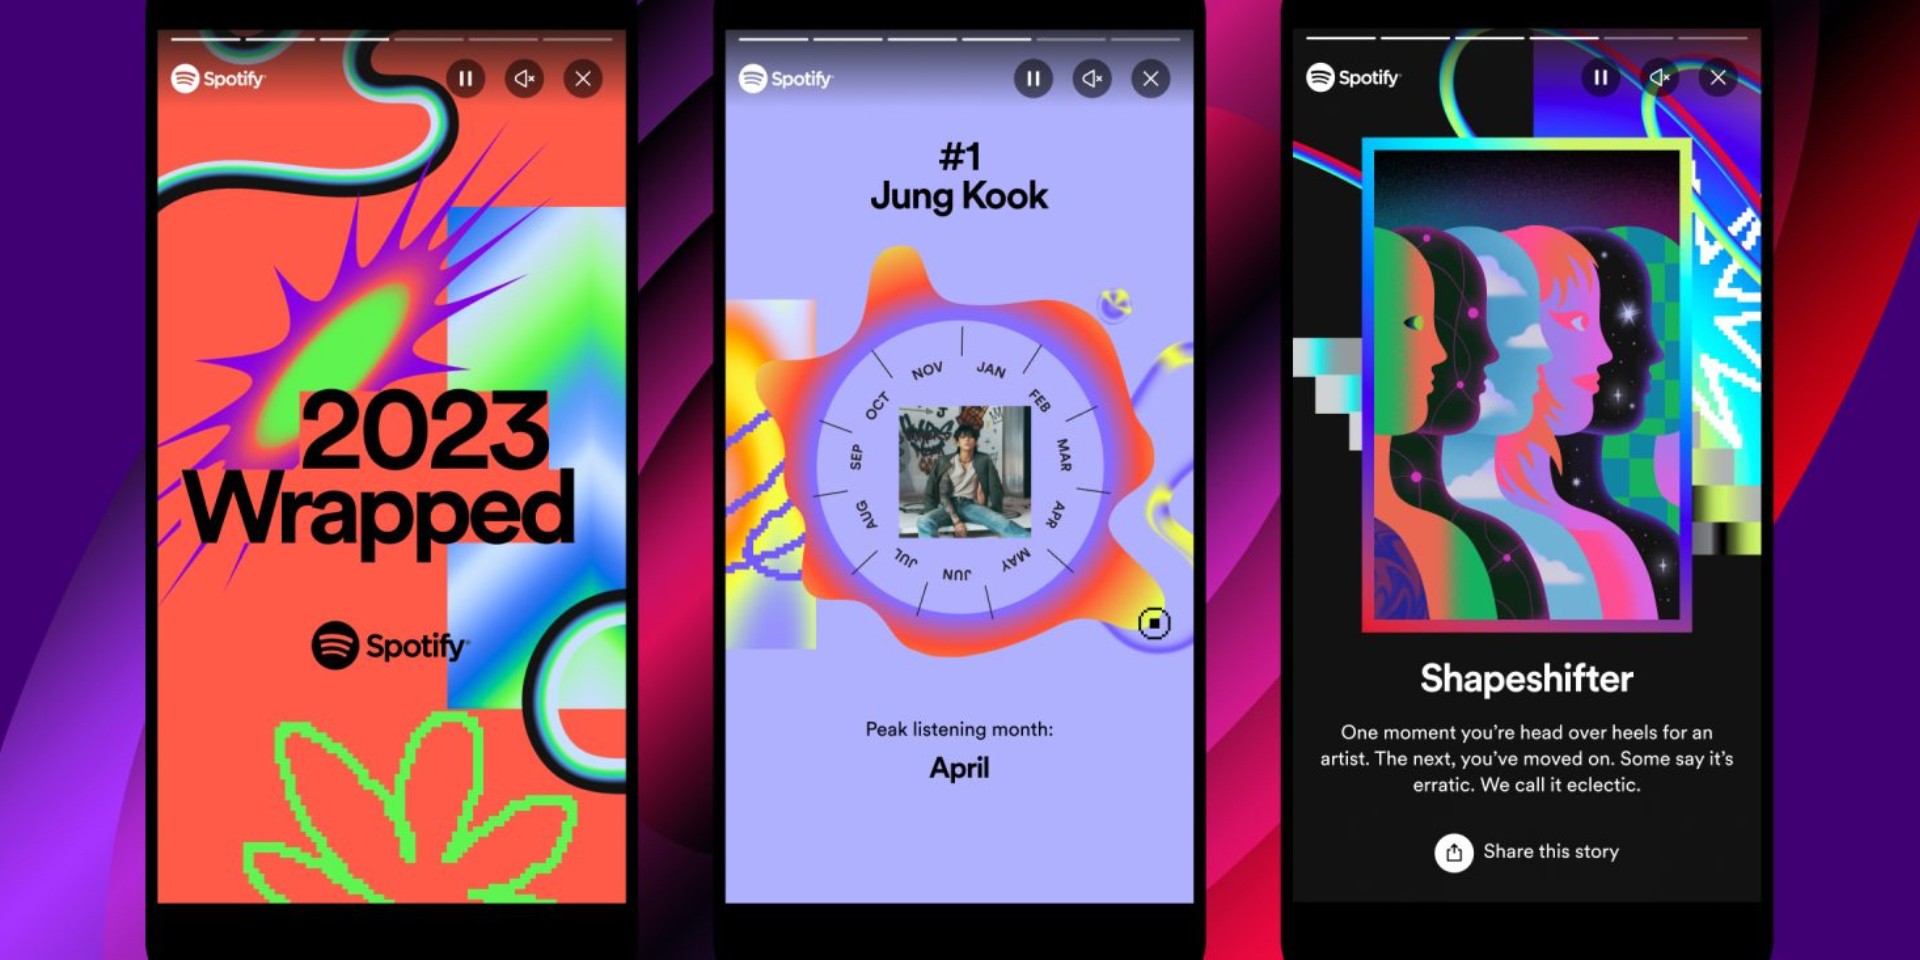 Spotify Wrapped 2023 returns with refreshing features – Sound Town, Artists Messages, Wrapped feed, and more